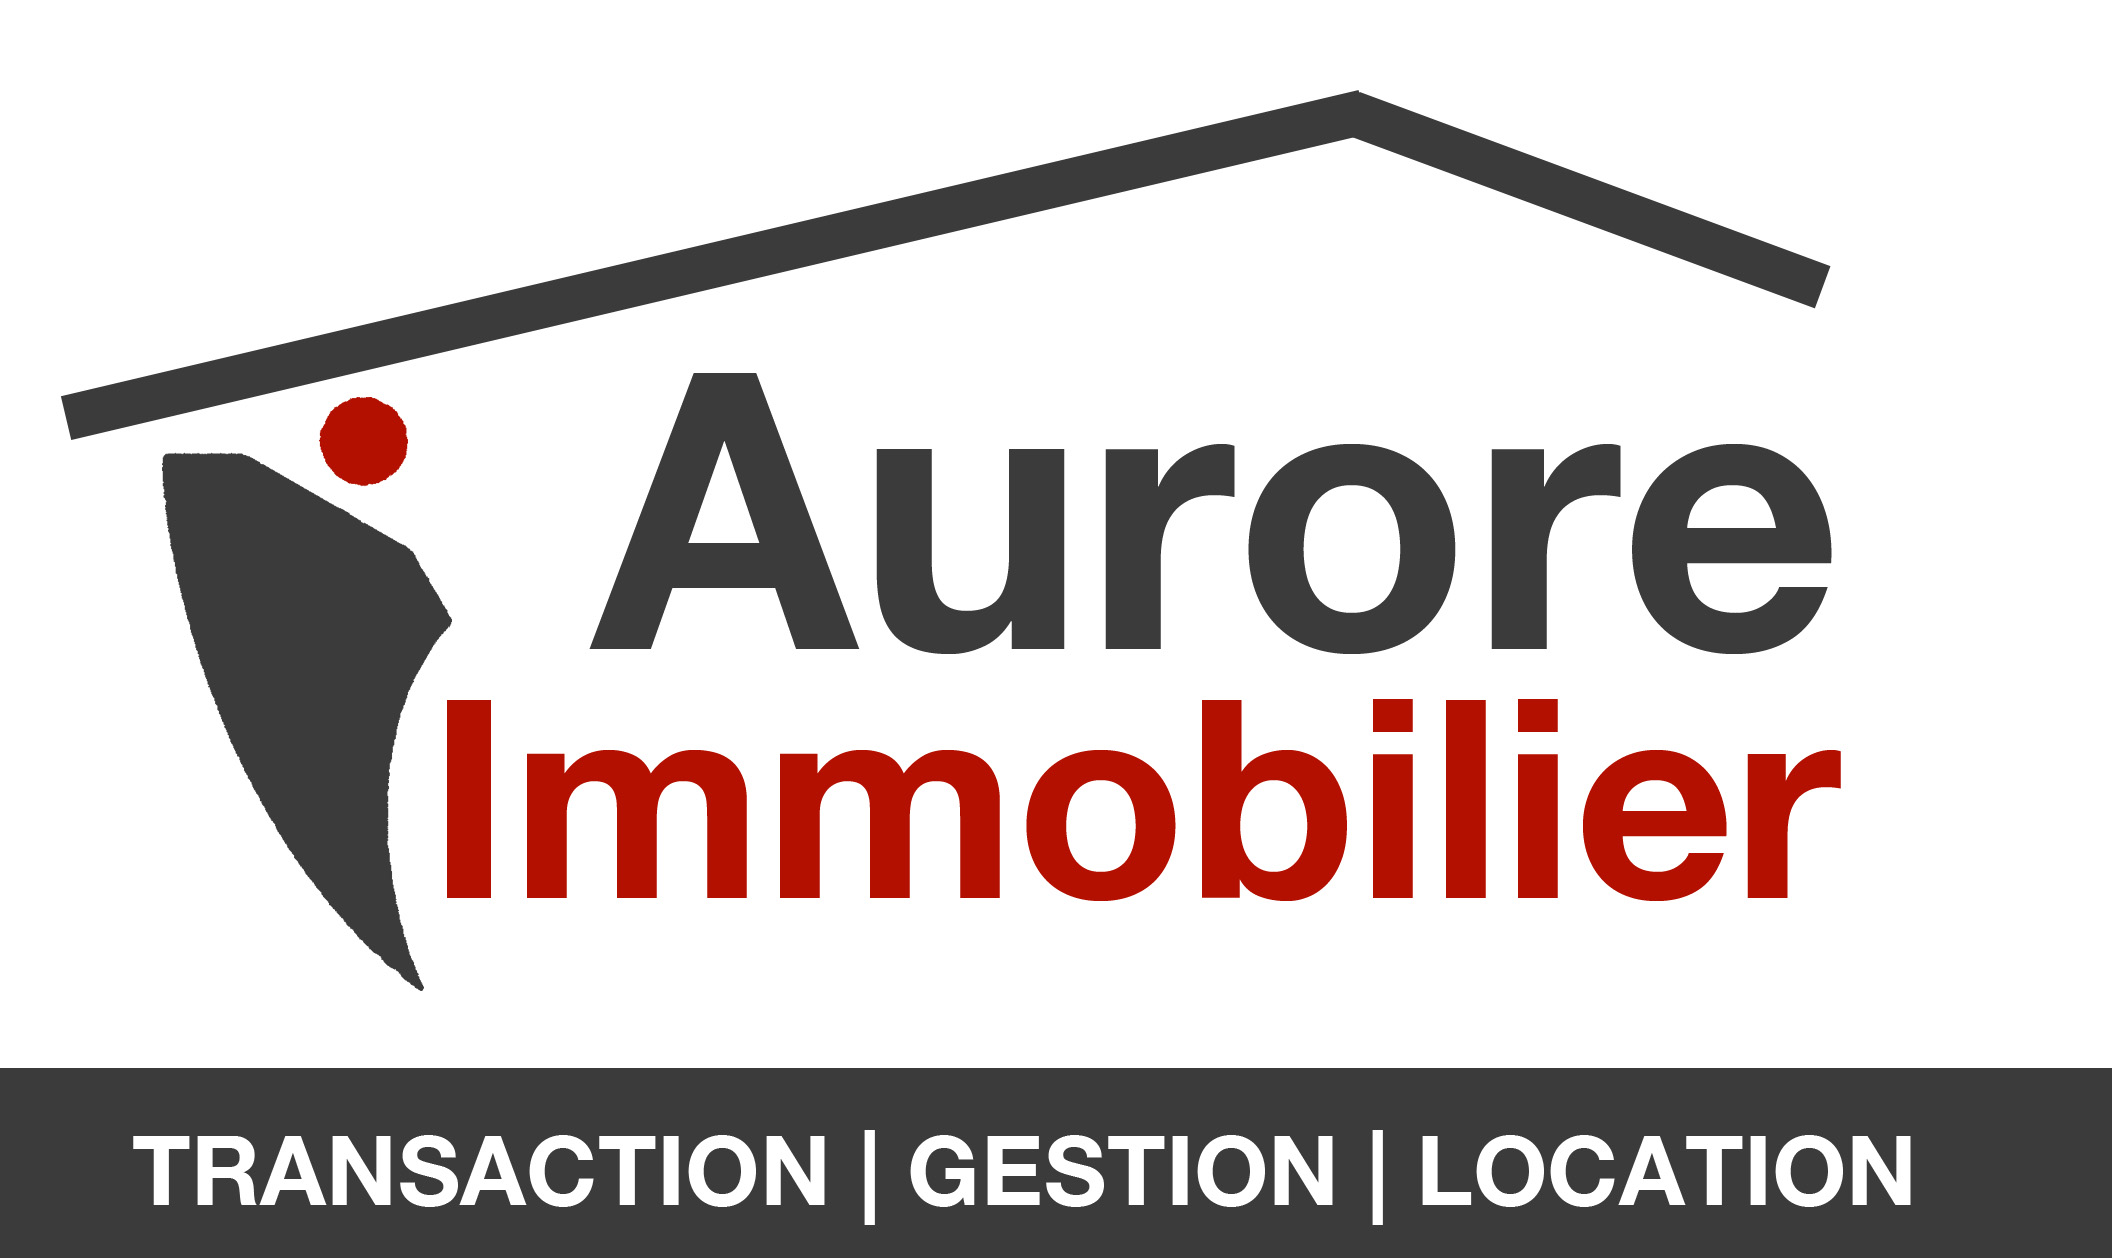 AURORE IMMOBILIER